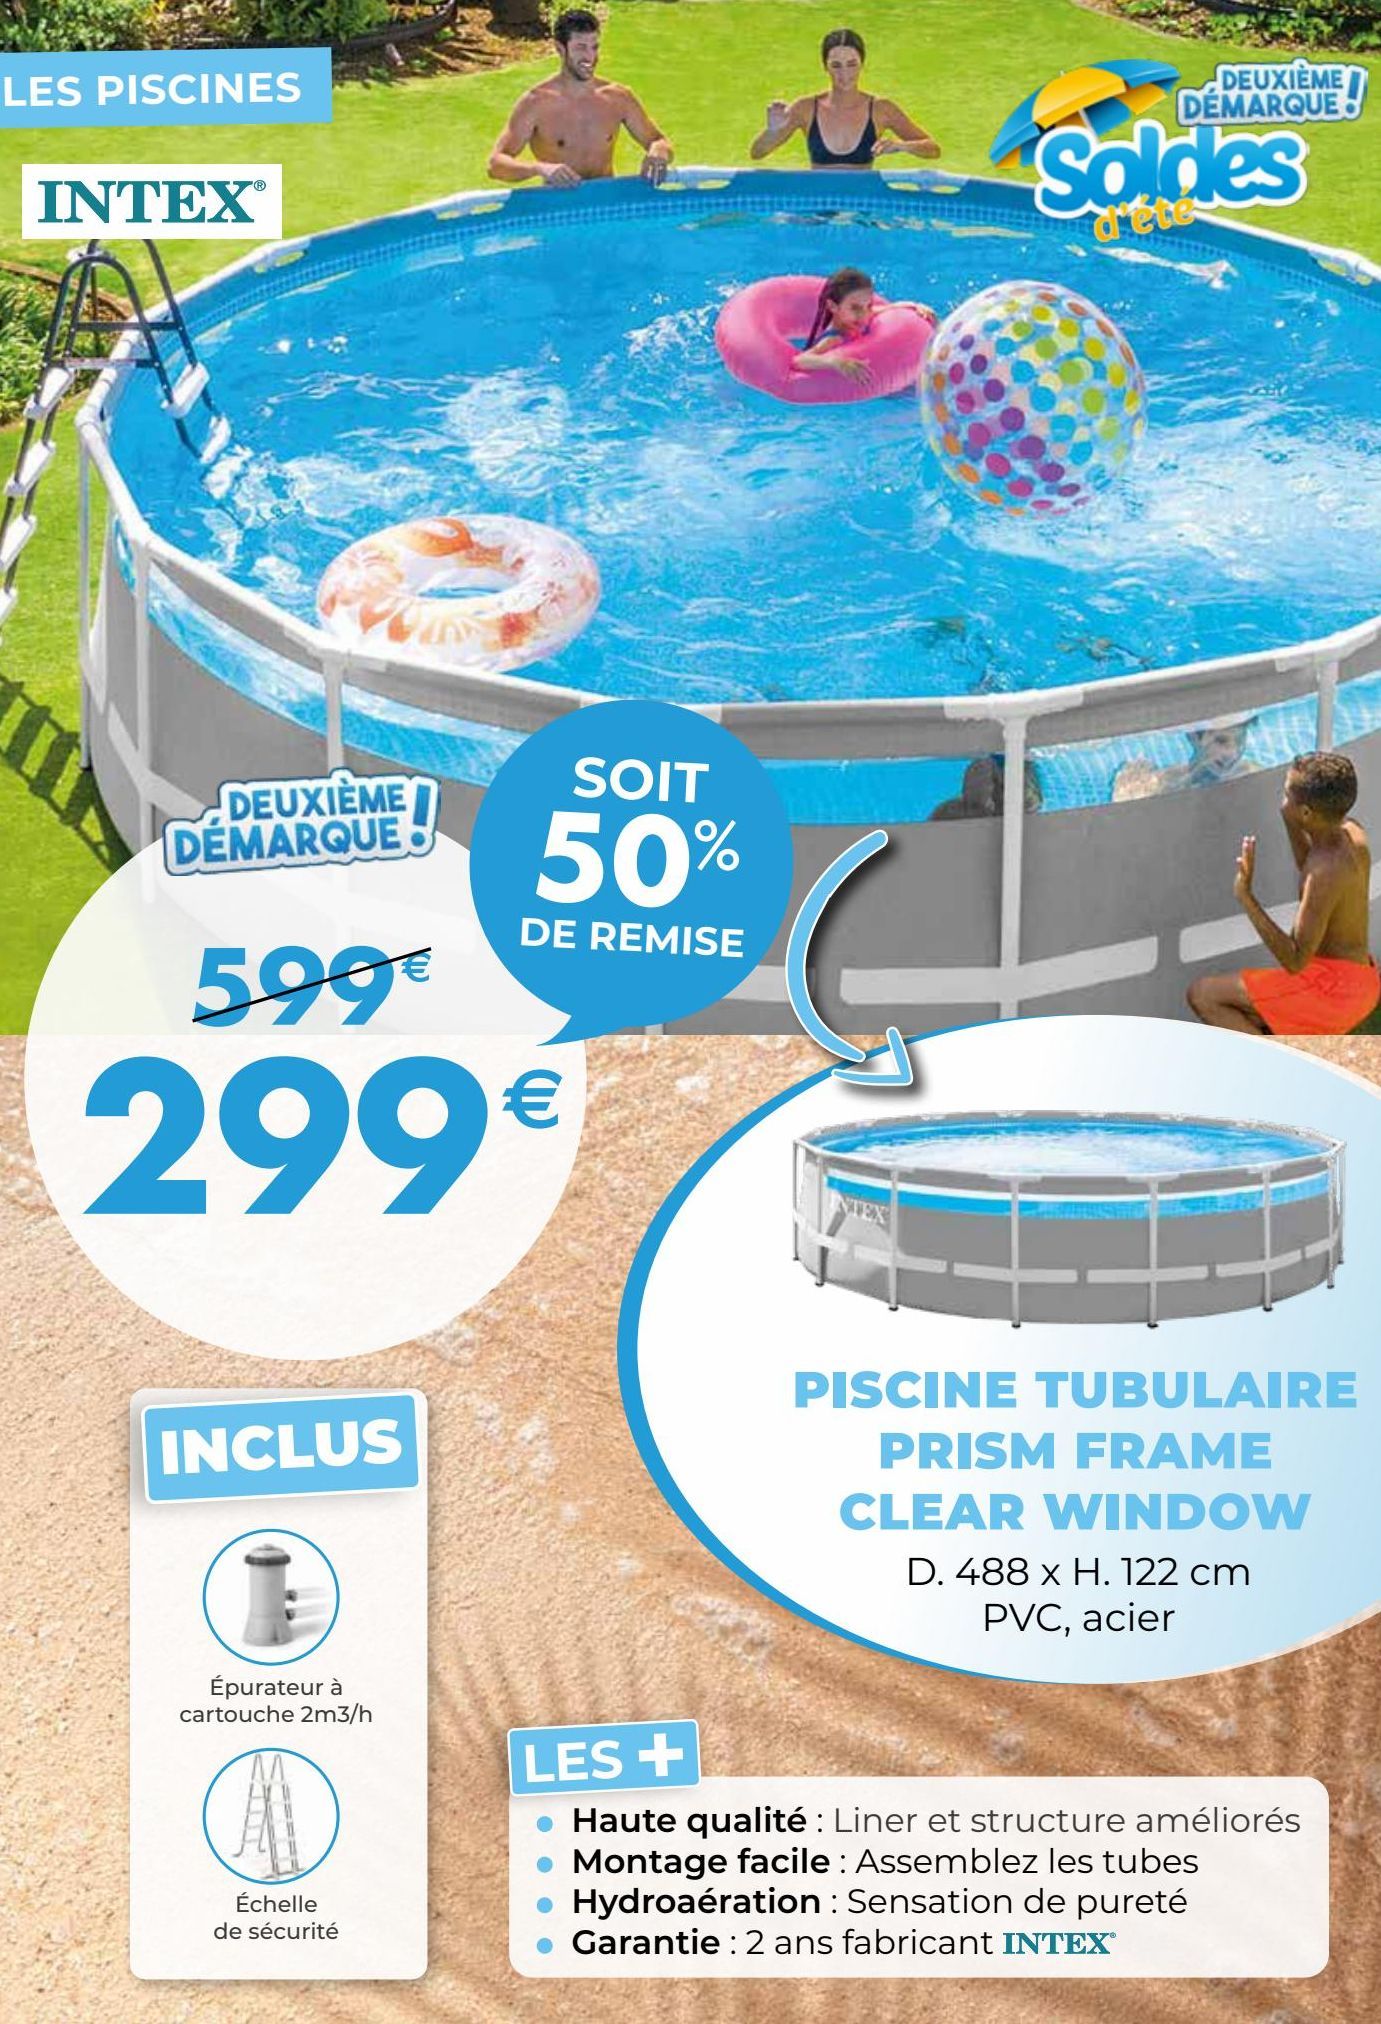 piscine tubulaire prism frame clear window